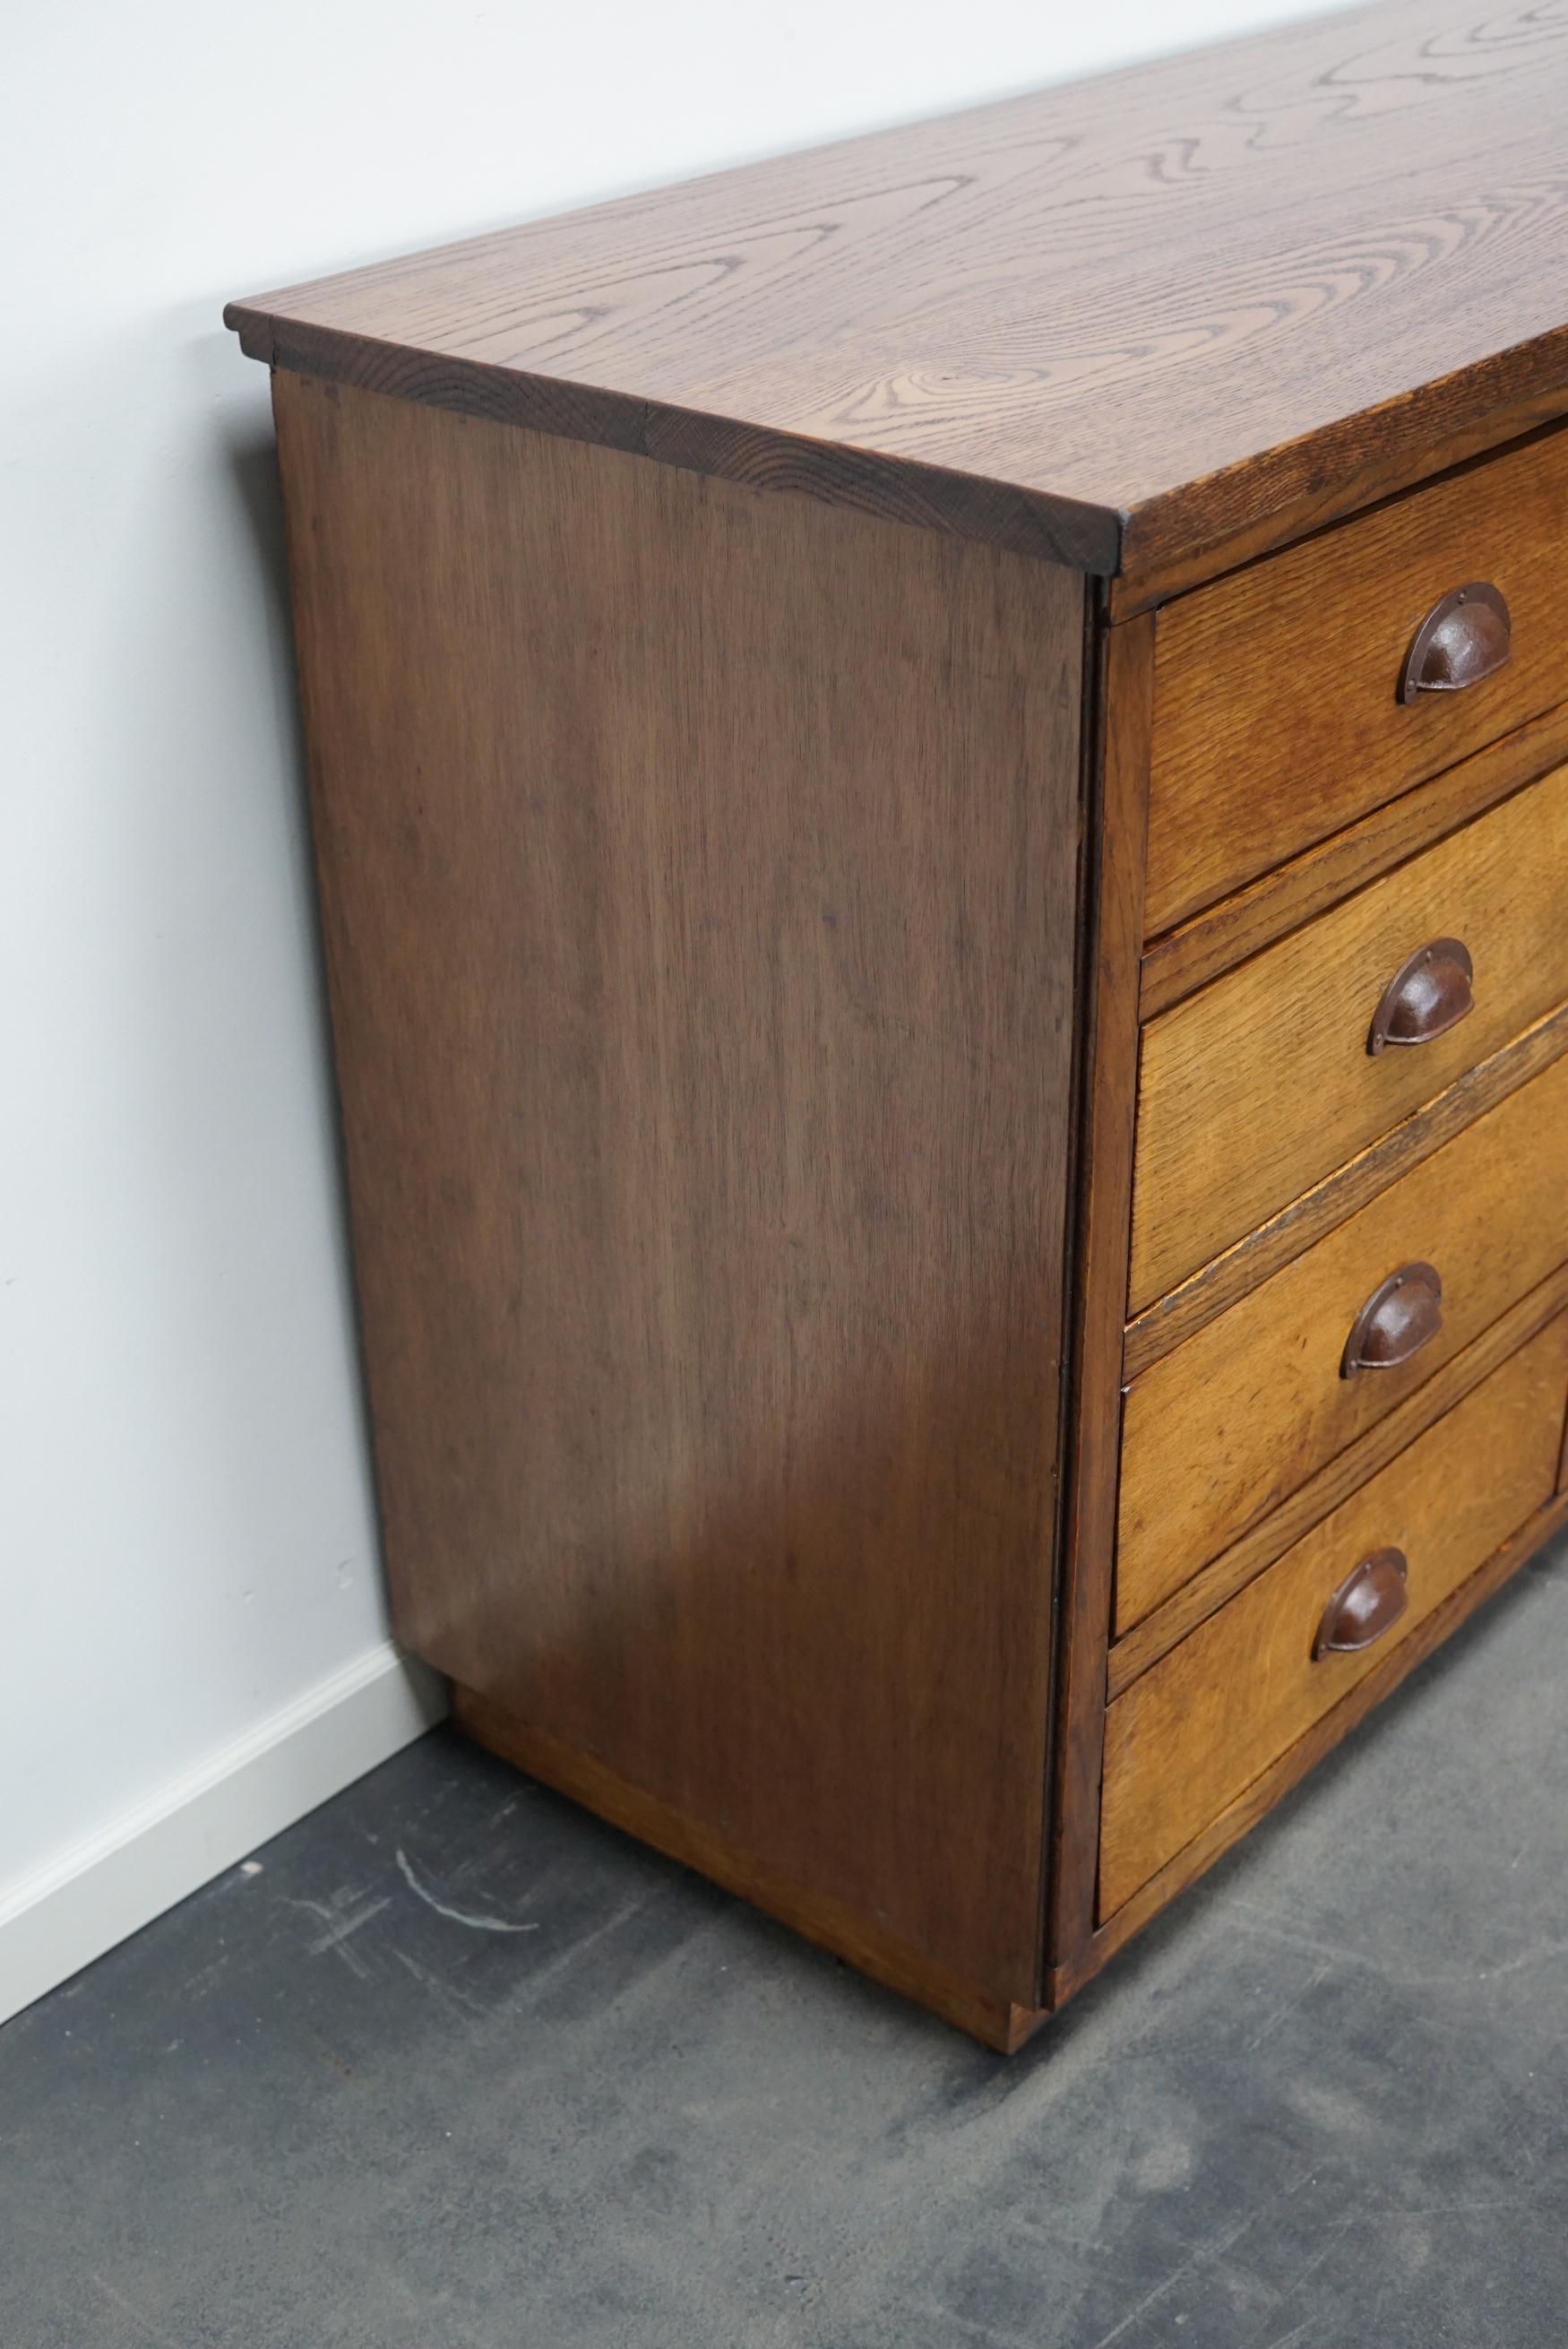 This apothecary cabinet was designed and made from oak circa 1950 in the Netherlands. It features 12 decent sized drawers with metal hardware. The inside of the drawers measure: DWH 37 x 42 x 12 cm.